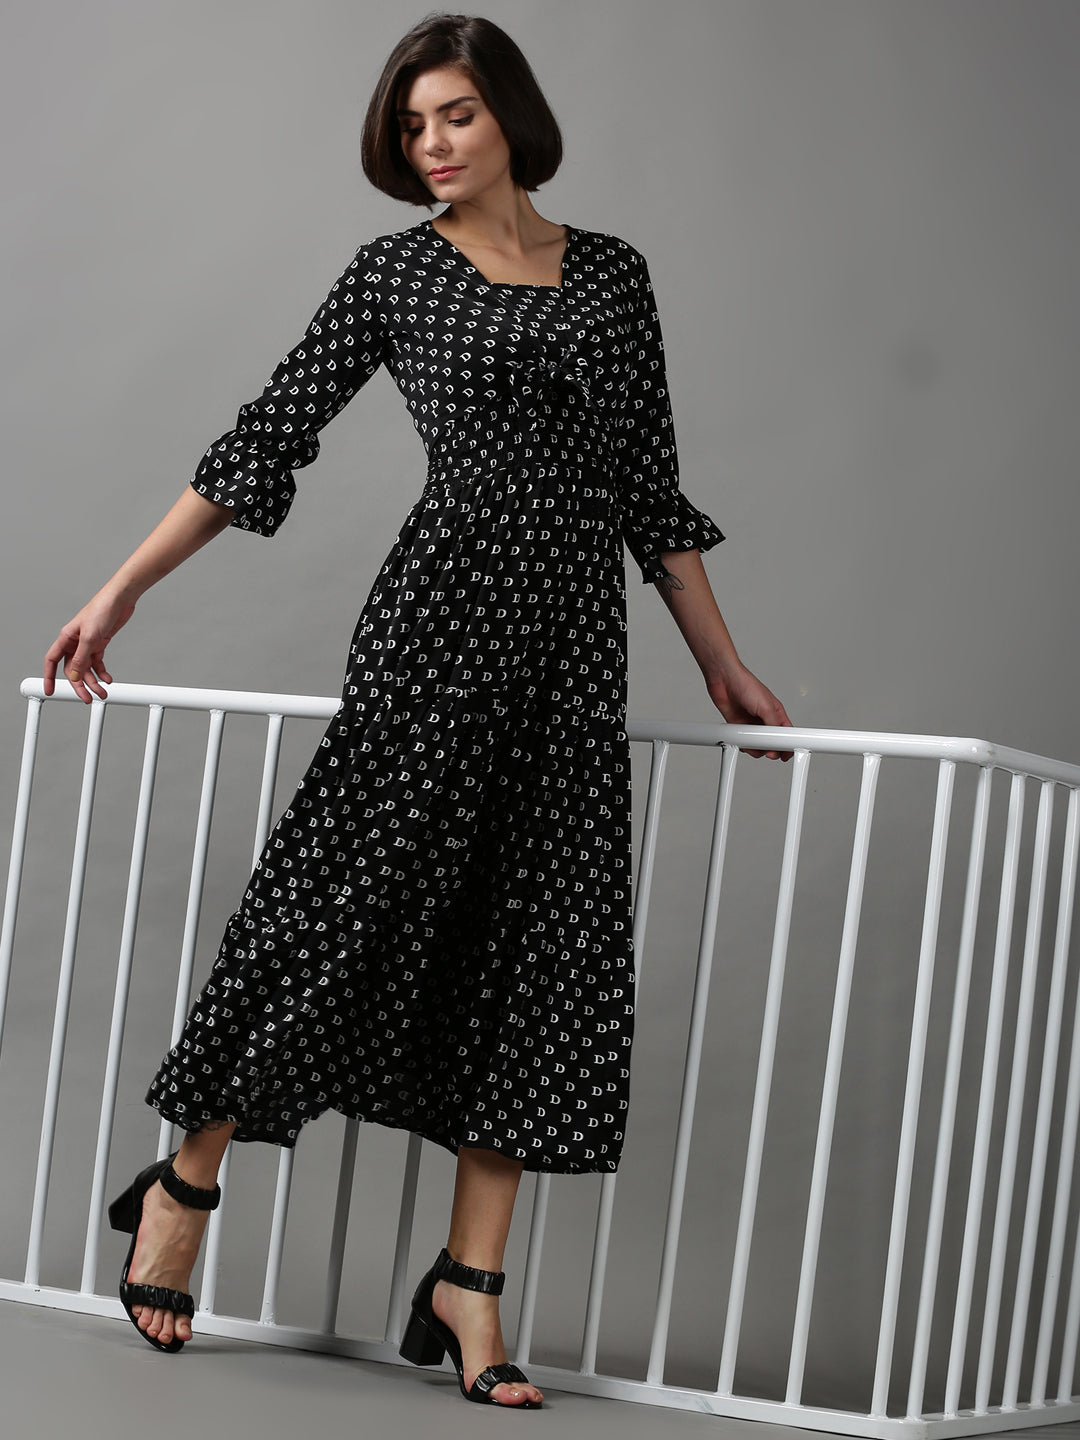 Women's Black Printed Fit and Flare Dress